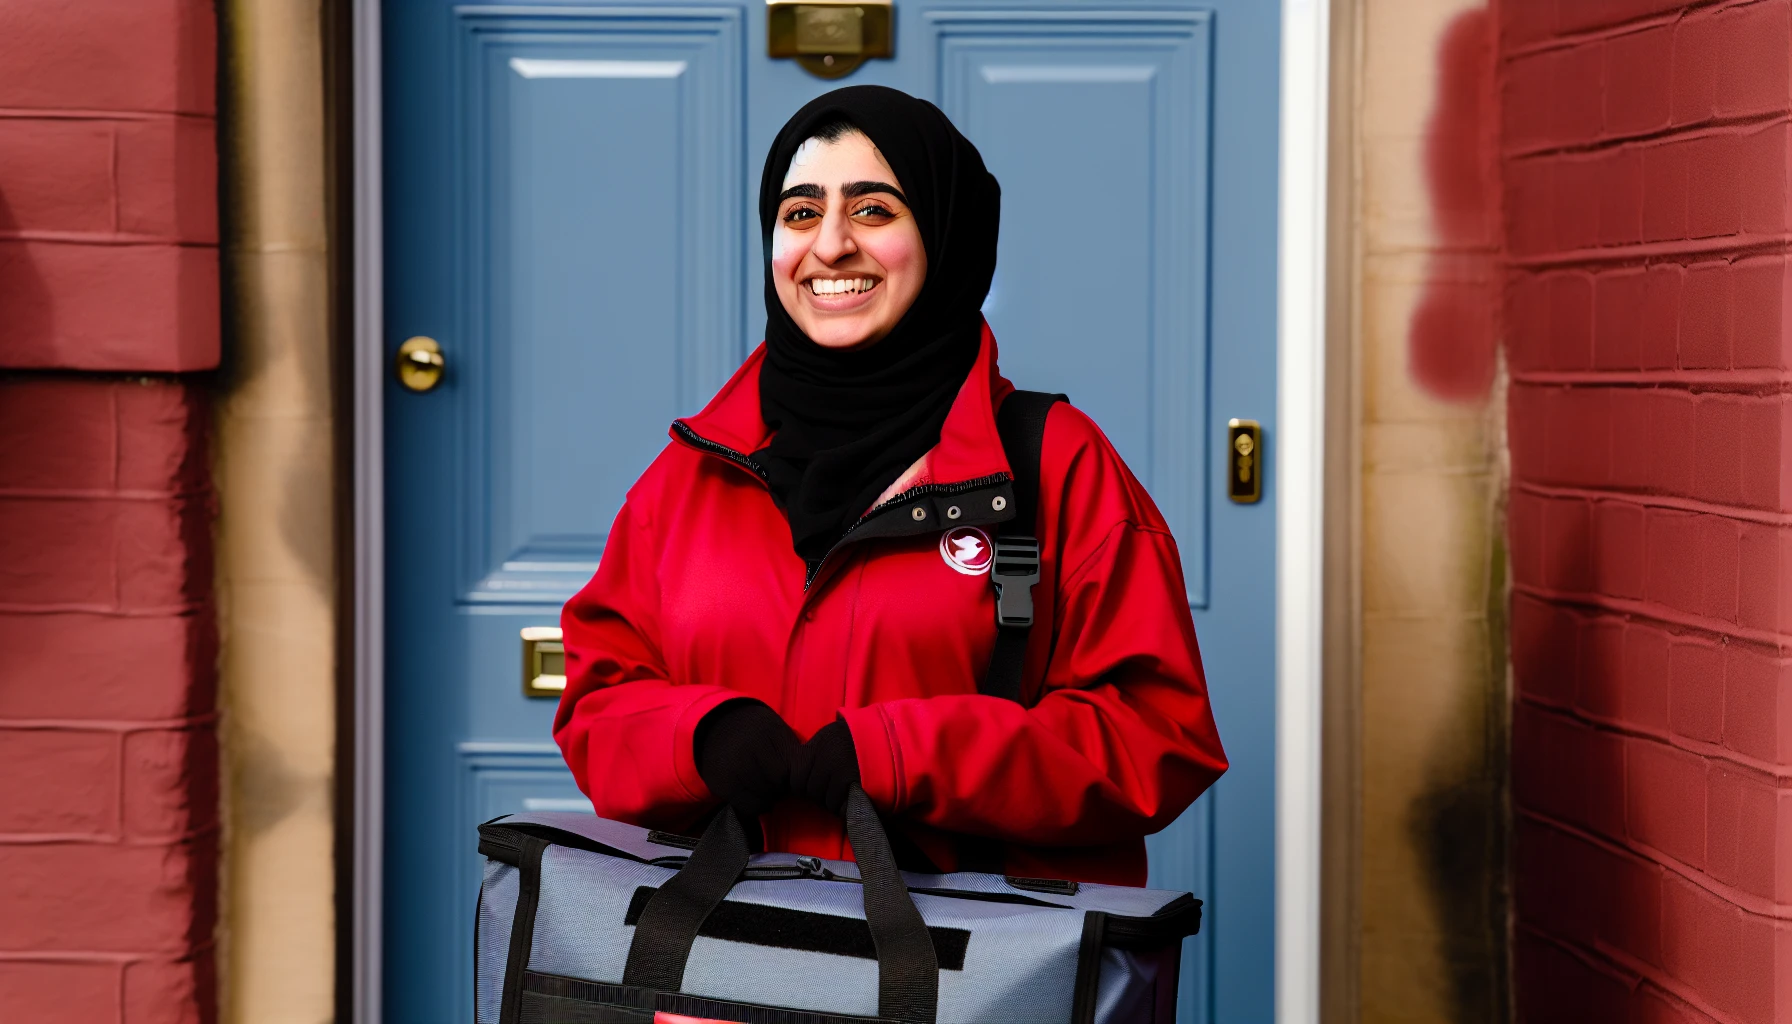 A woman delivering food to a customer's doorstep